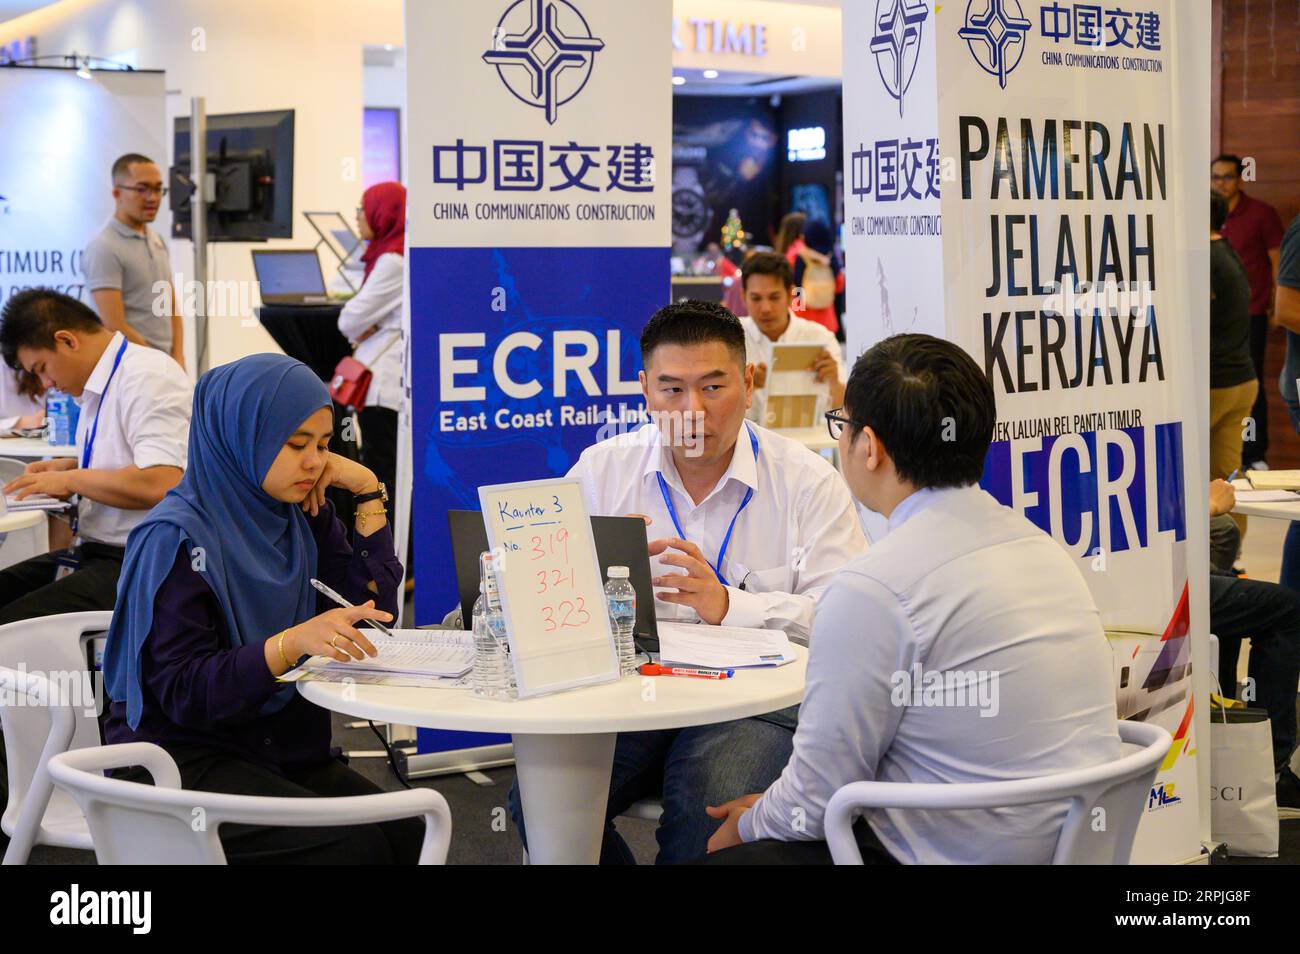 191209 -- KUANTAN, Dec. 9, 2019 -- A job-seeker R attends a recruitment roadshow of the East Coast Rail Link ECRL, a major infrastructure project between China and Malaysia, in Kuantan, Malaysia, Dec. 6, 2019.  Xinhua Headlines: Railway megaproject ECRL creating new opportunities in Malaysia as construction picks up ZhuxWei PUBLICATIONxNOTxINxCHN Stock Photo